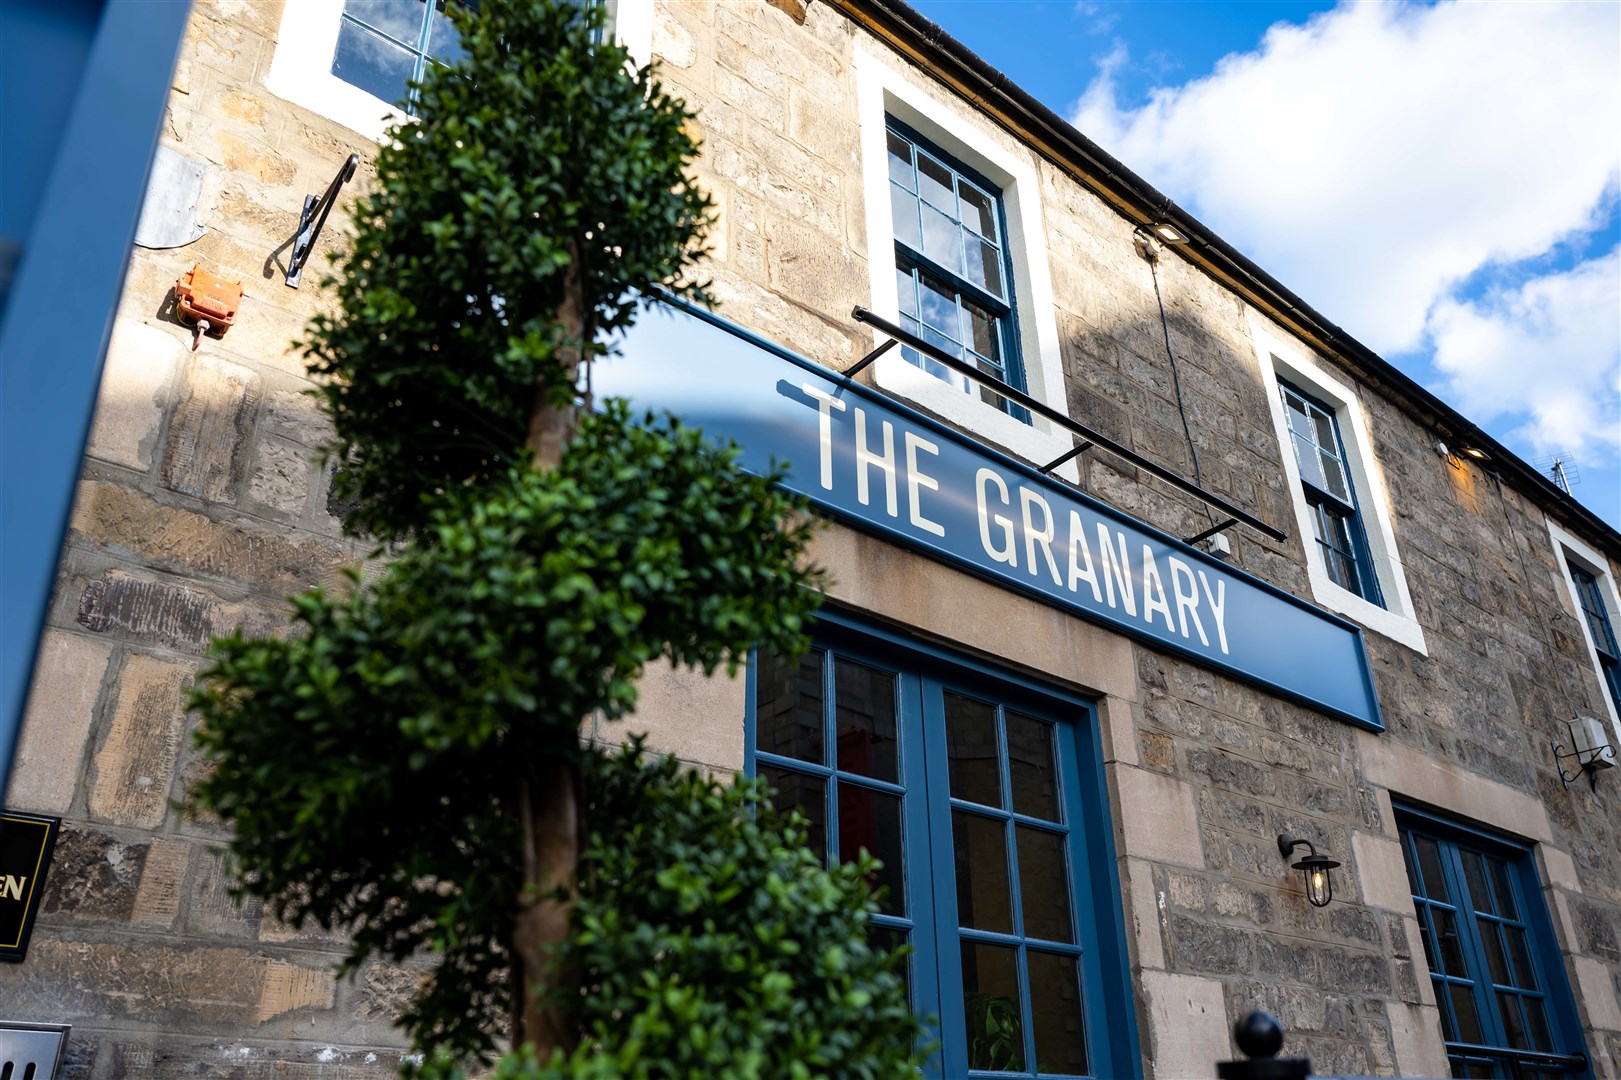 The Granary has reopened after a six week refit. Picture: Michal Wachucik / Abermedia